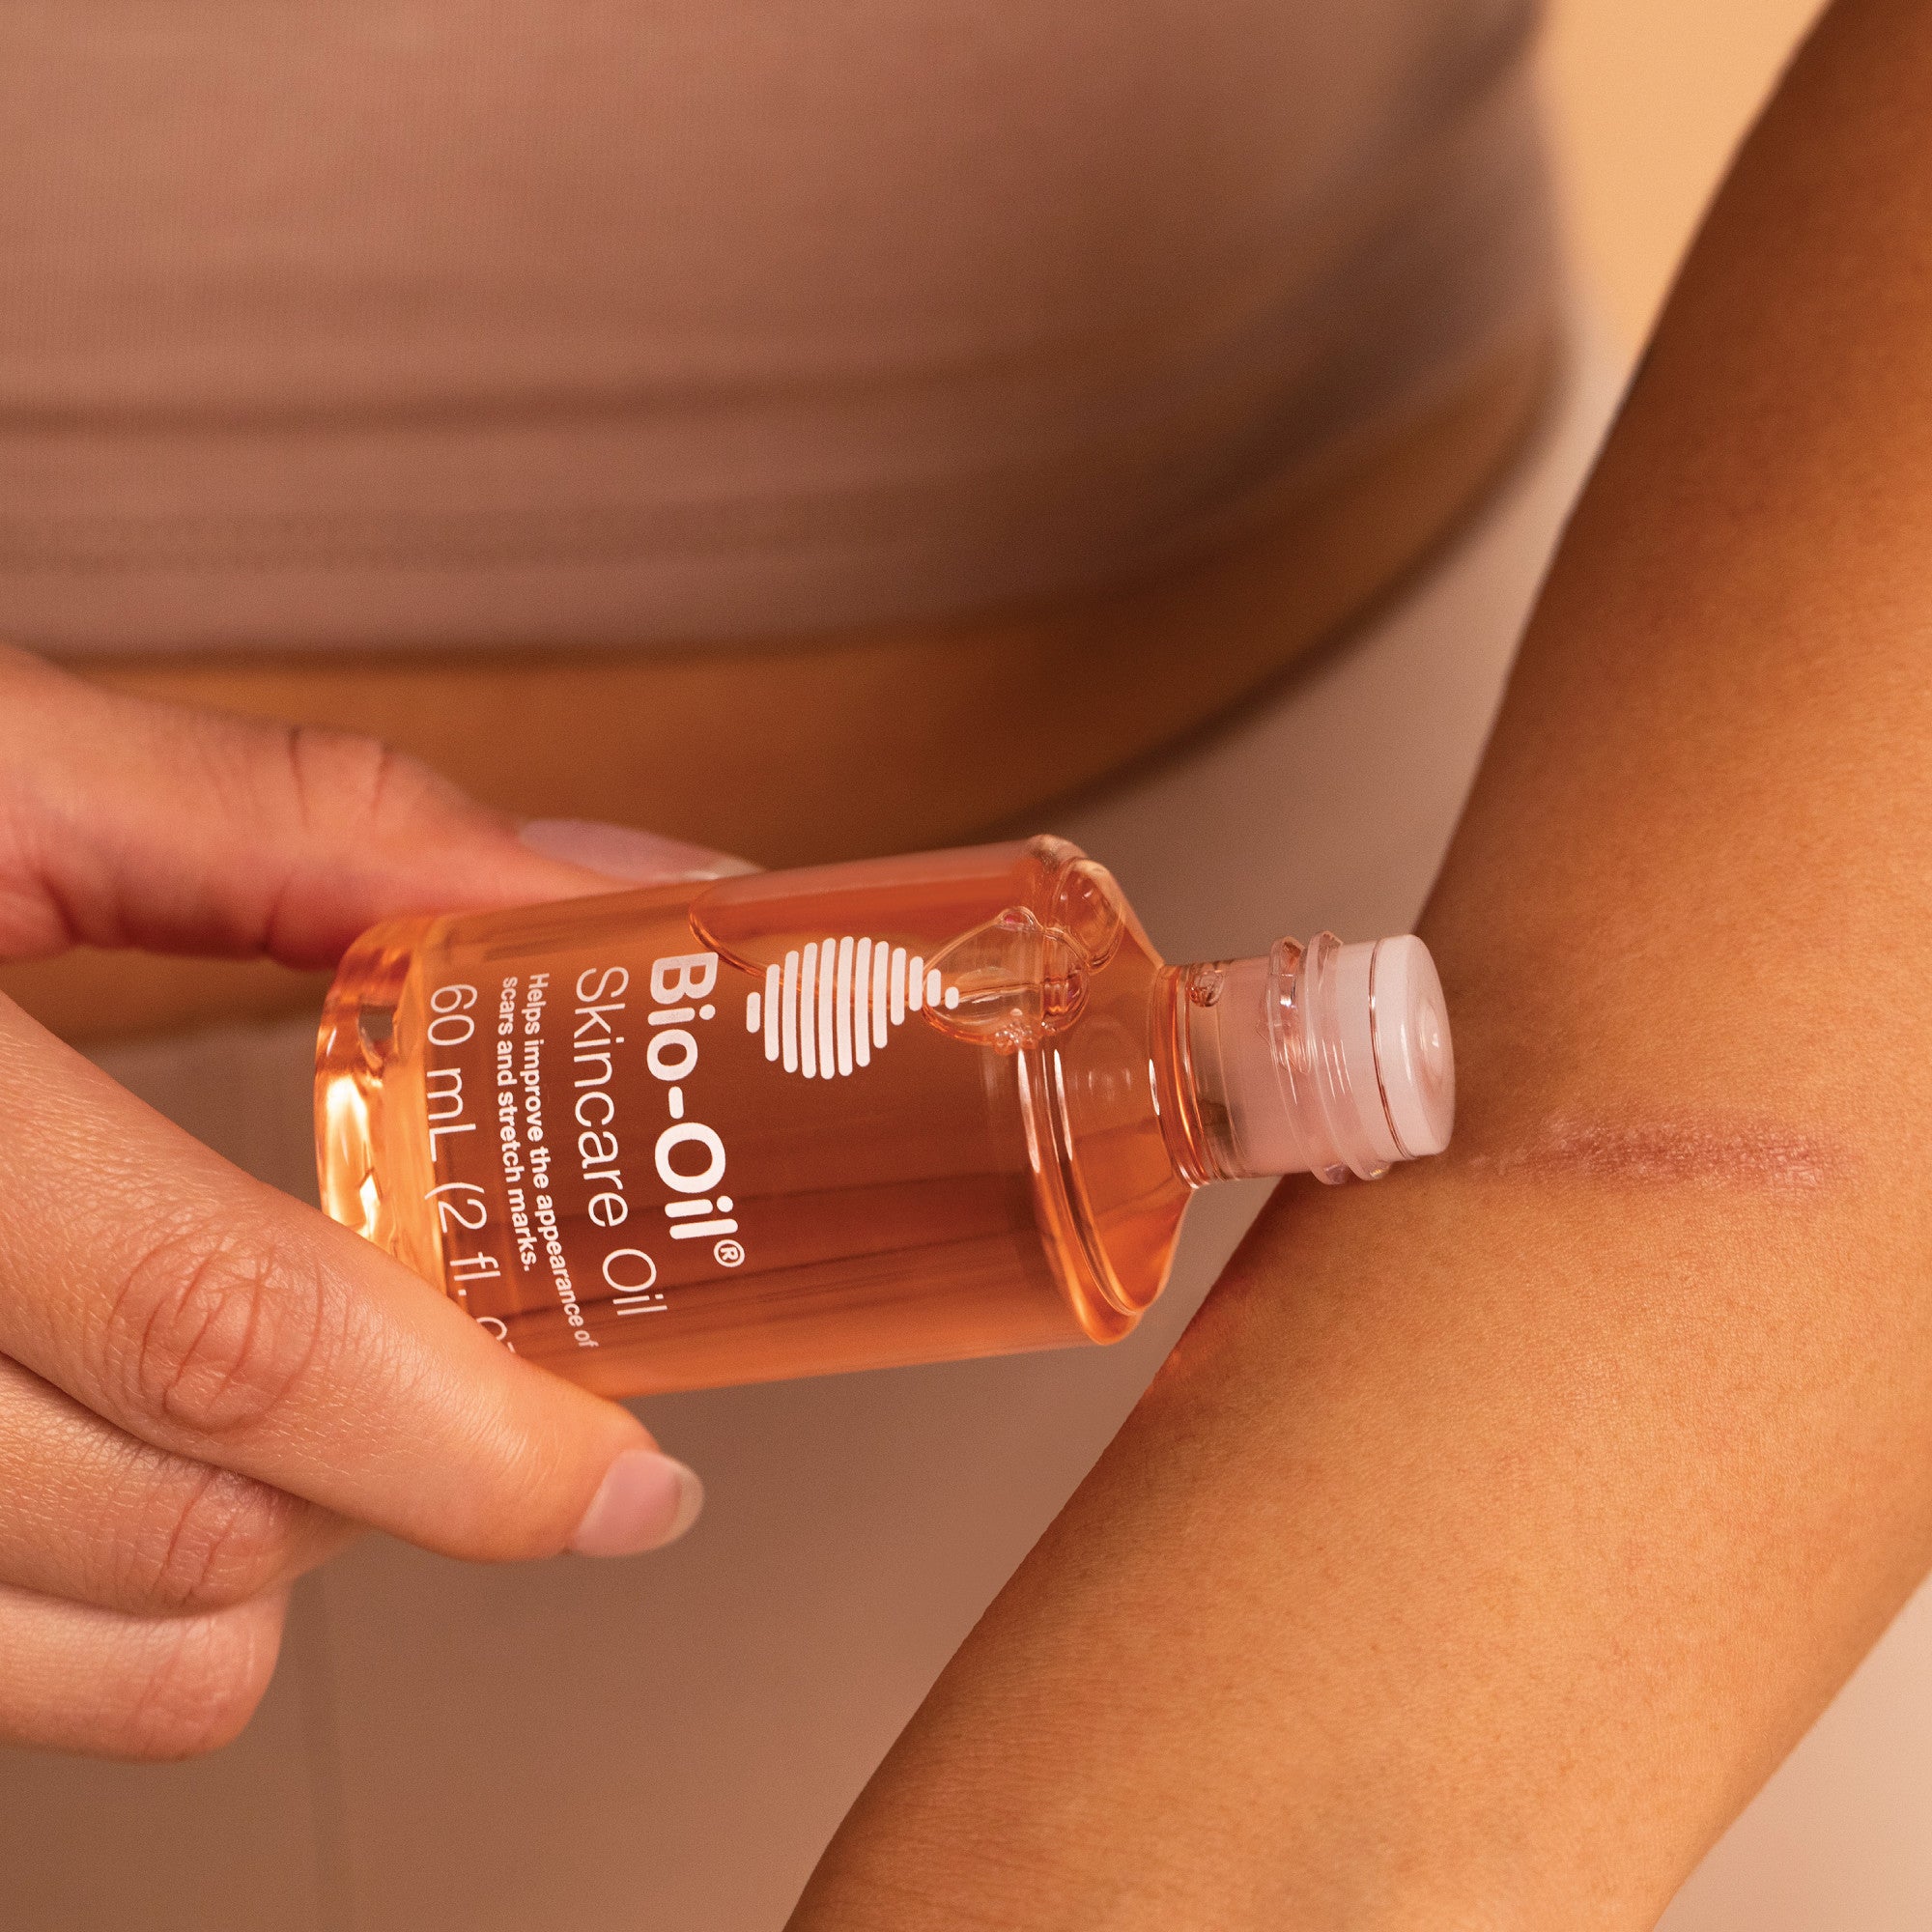 A woman is holding a bottle of Bio-Oil Skincare Oil on her arm.